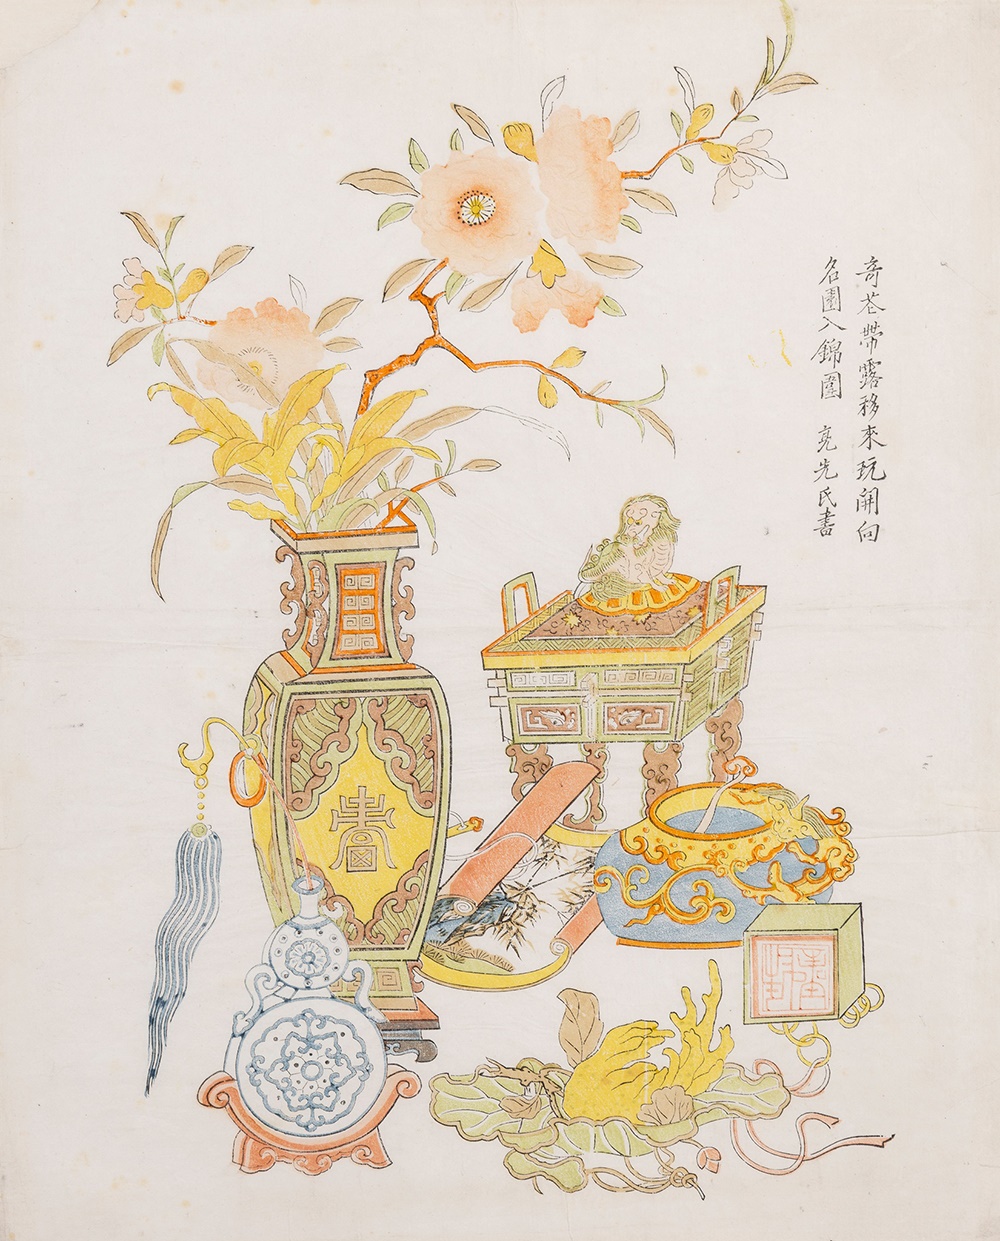 Lot 48 | Rare Group of Four Woodblock Prints by Ding Liang (Active 1735 - 1750)